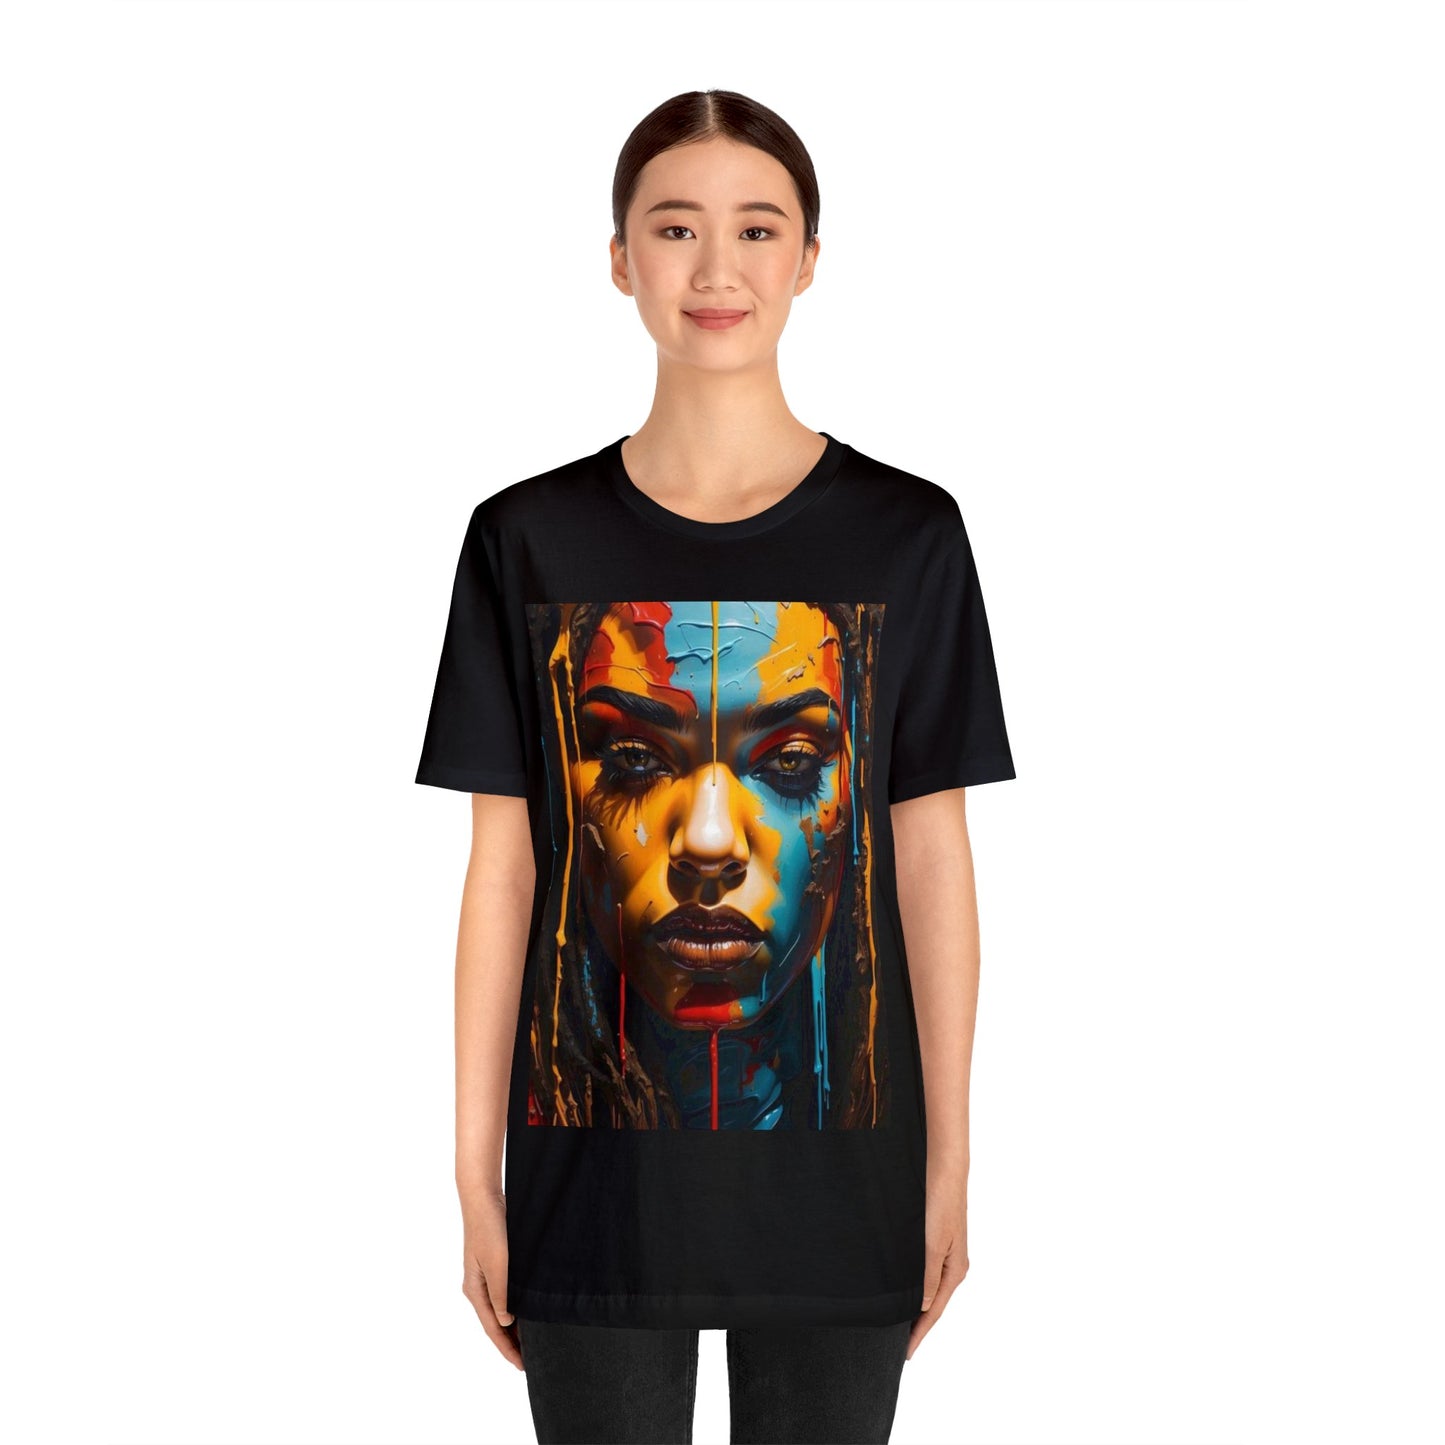 Filthy Beauty | Black Hippie | Abstract | Colorful | Trendy | Artwork |  Unisex | Men's | Women's | Tee | T-Shirt